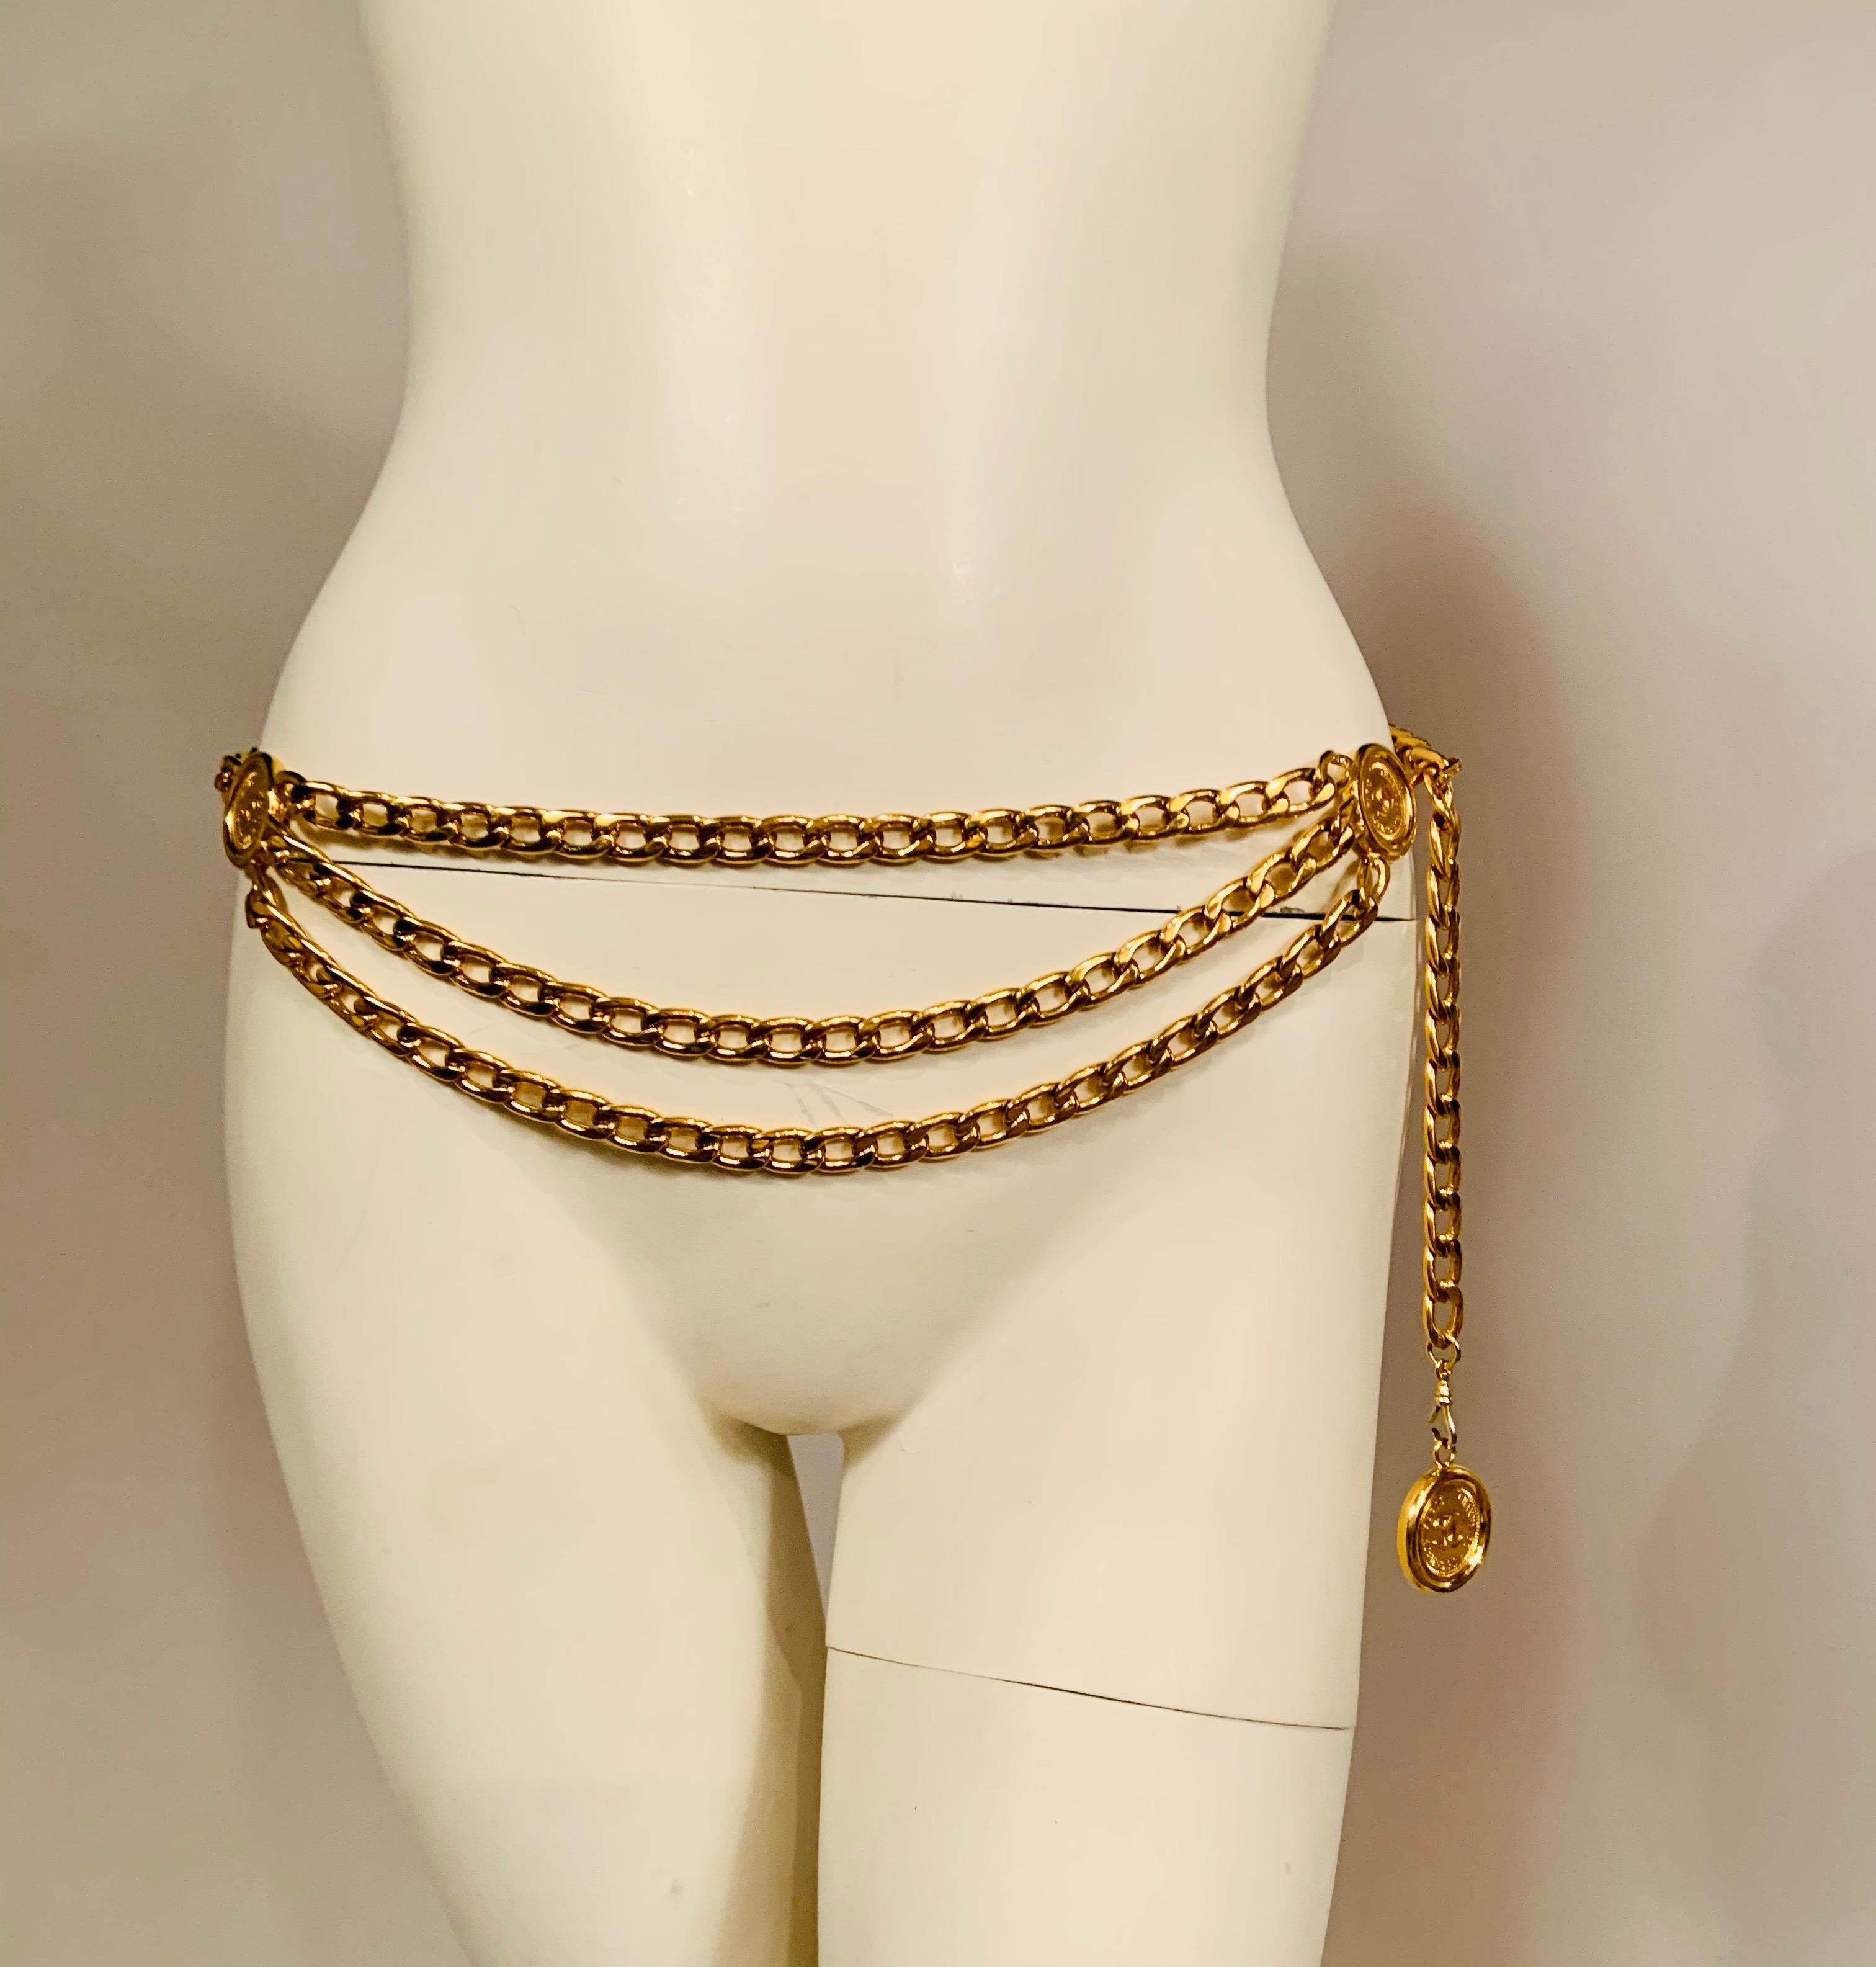 This classic three row Chanel gold toned chain belt has three large round medallions with the famous Paris address of her Chanel House, 31 rue Cambon on both sides.  The hook used to adjust the size is stamped Chanel with the double C logo. The belt